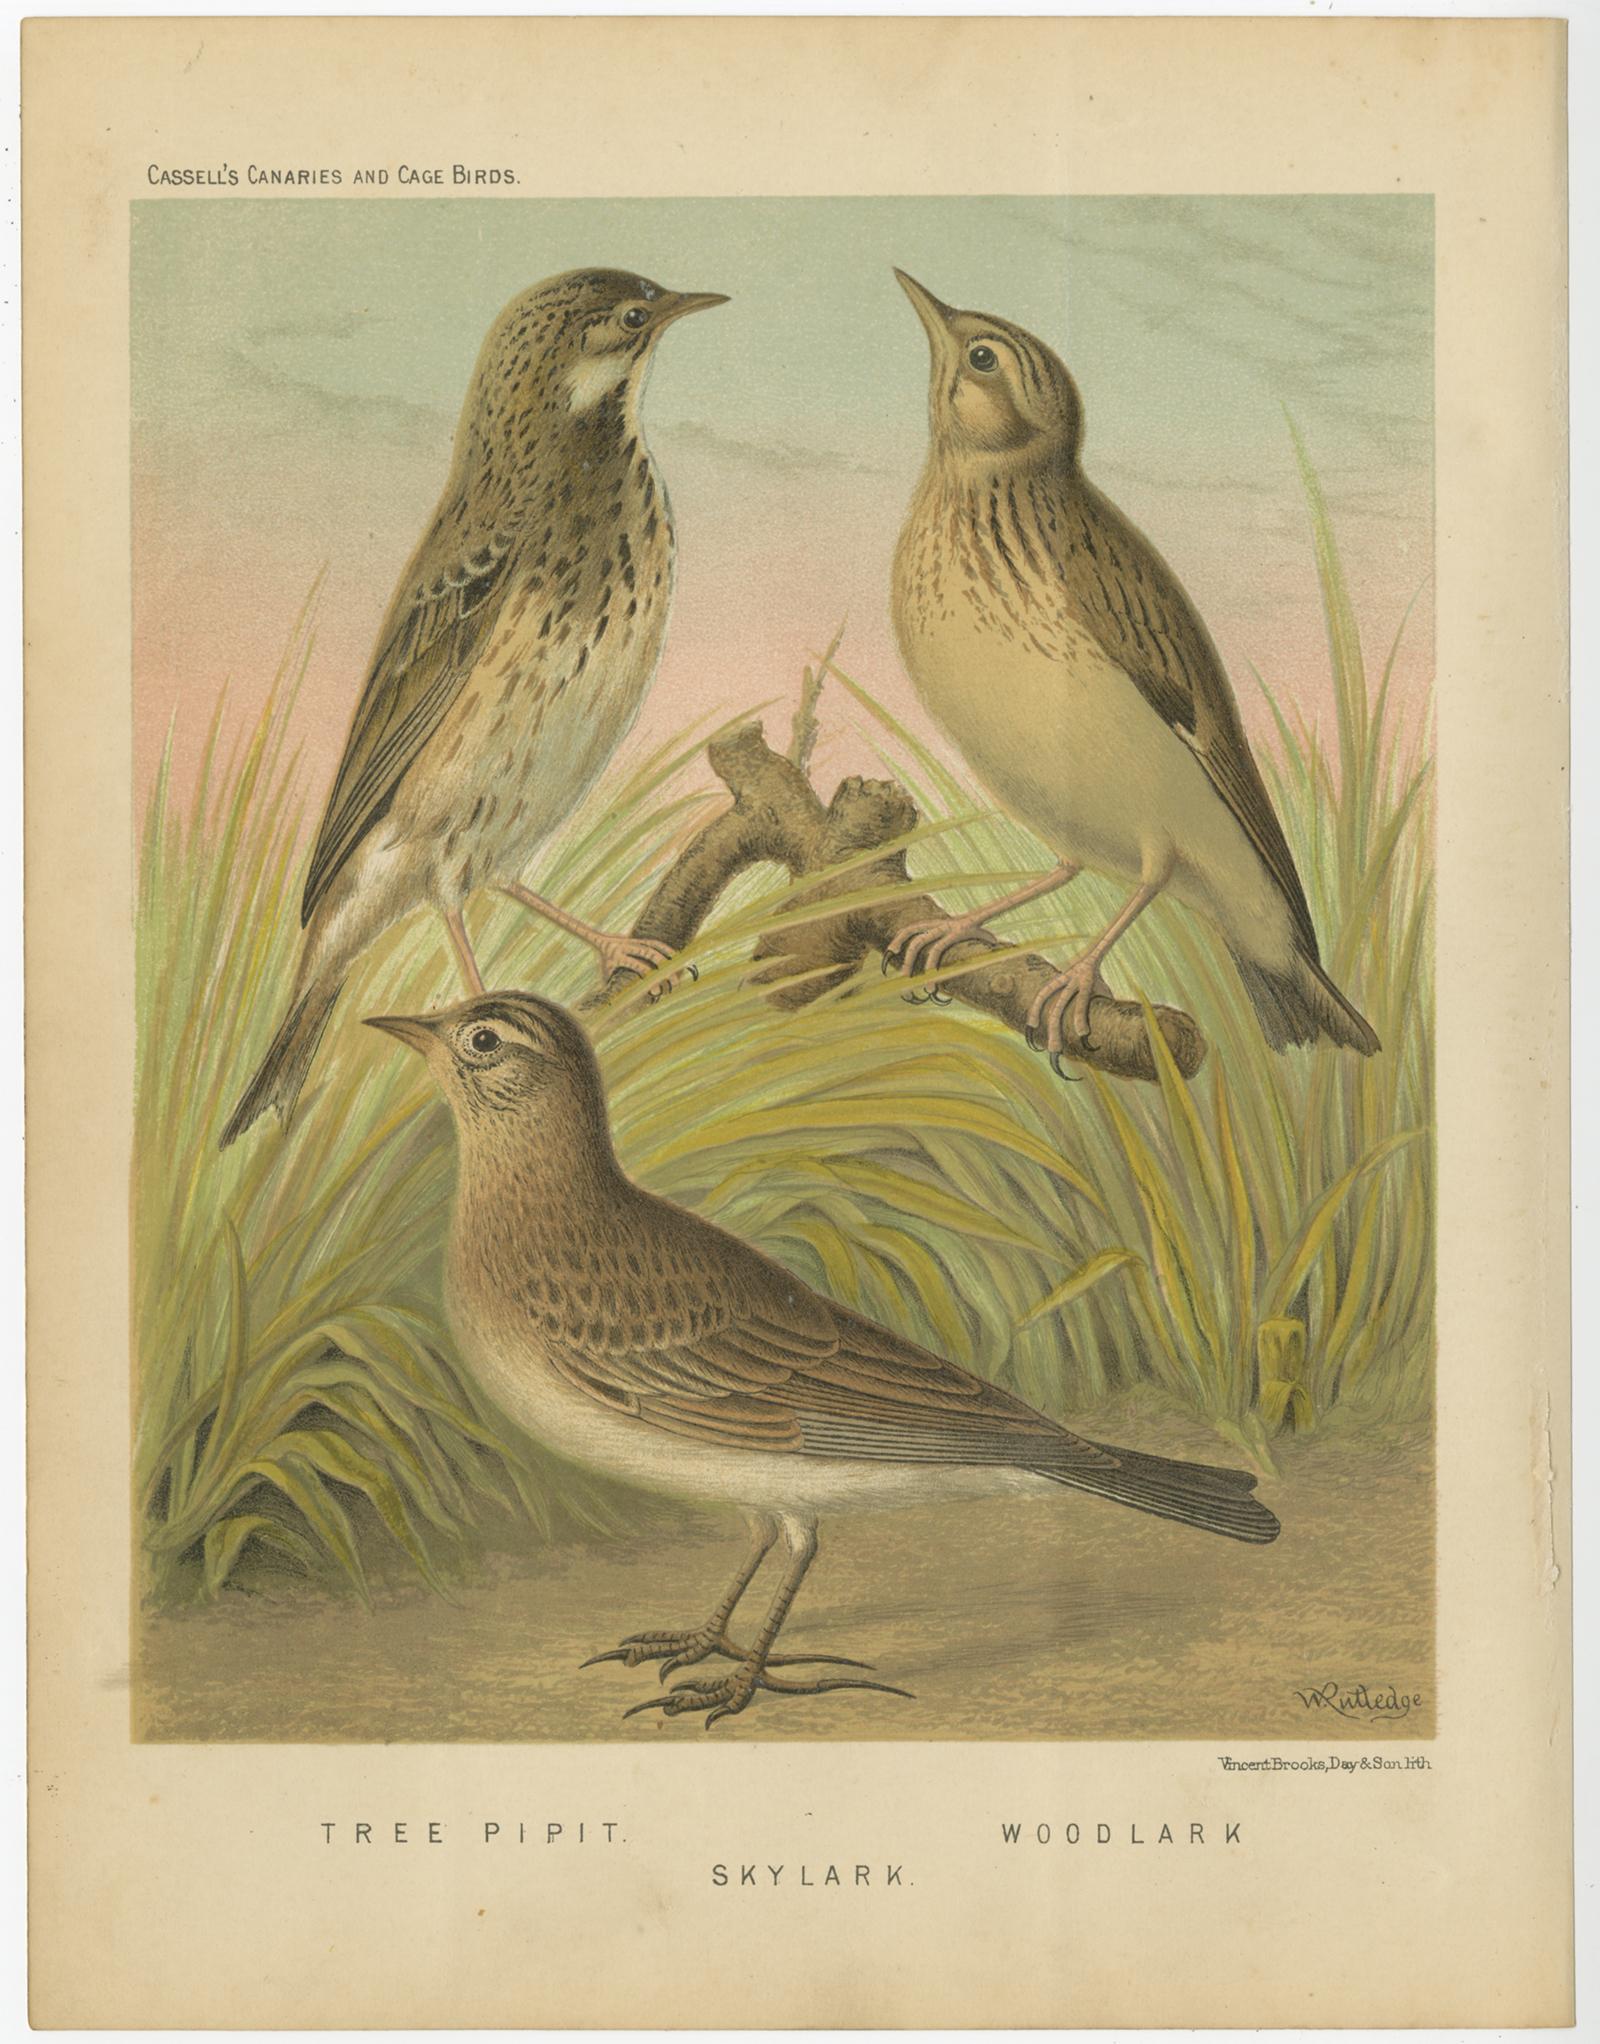 Antique bird print titled '1. Tree Pipit 2. Skylark 3. Woodlark' Old bird print depicting the Tree Pipit, Skylark and Woodlark. This print originates from: 'Illustrated book of canaries and cage-birds' by W. A. Blackston, W. Swaysland and August F.